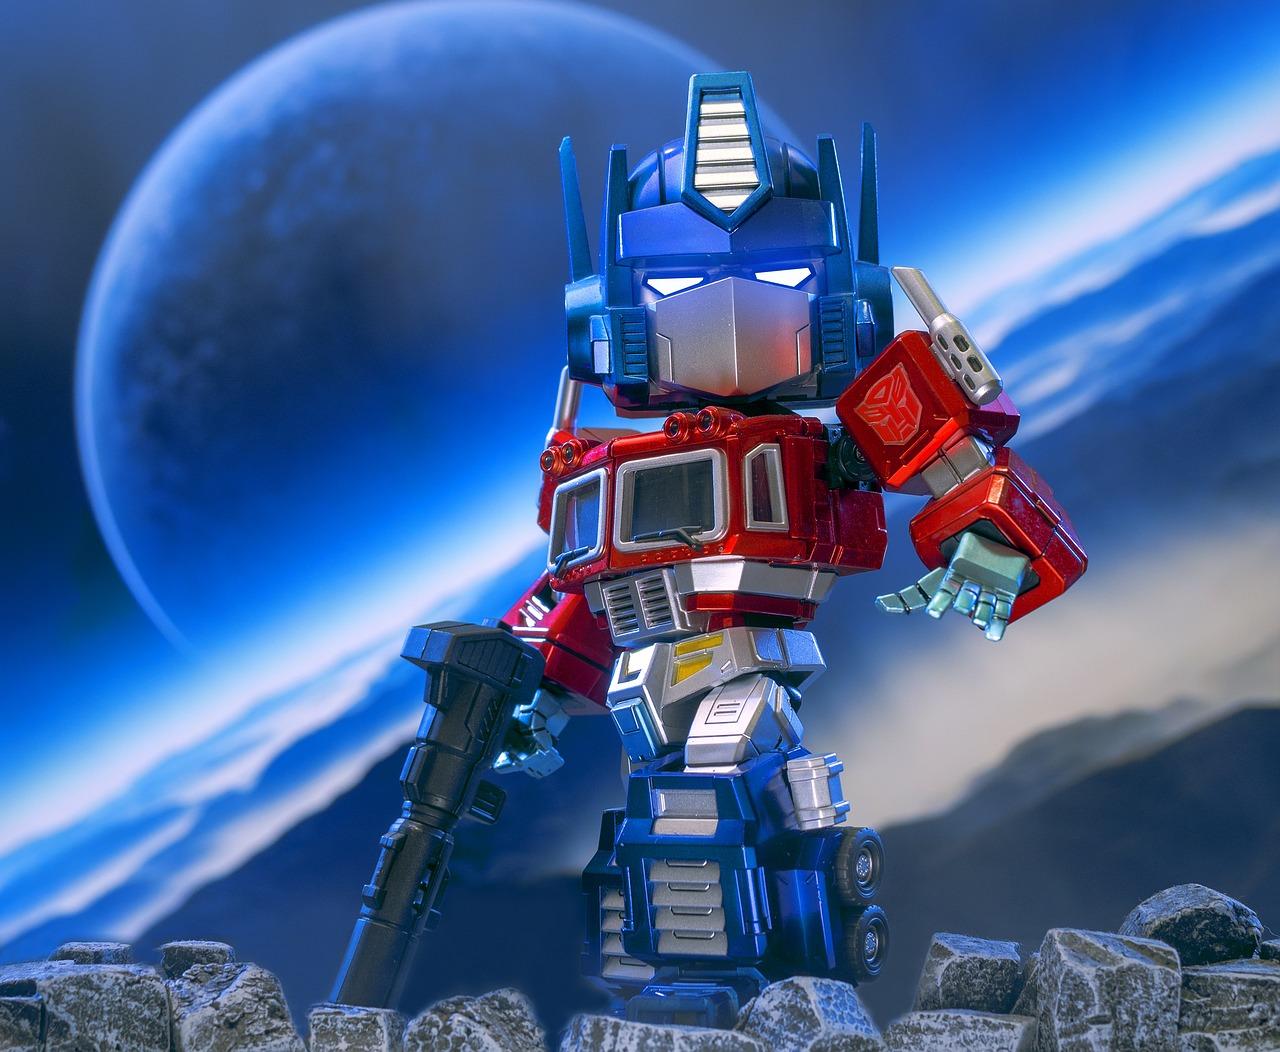 Who is Optimus Prime's father?